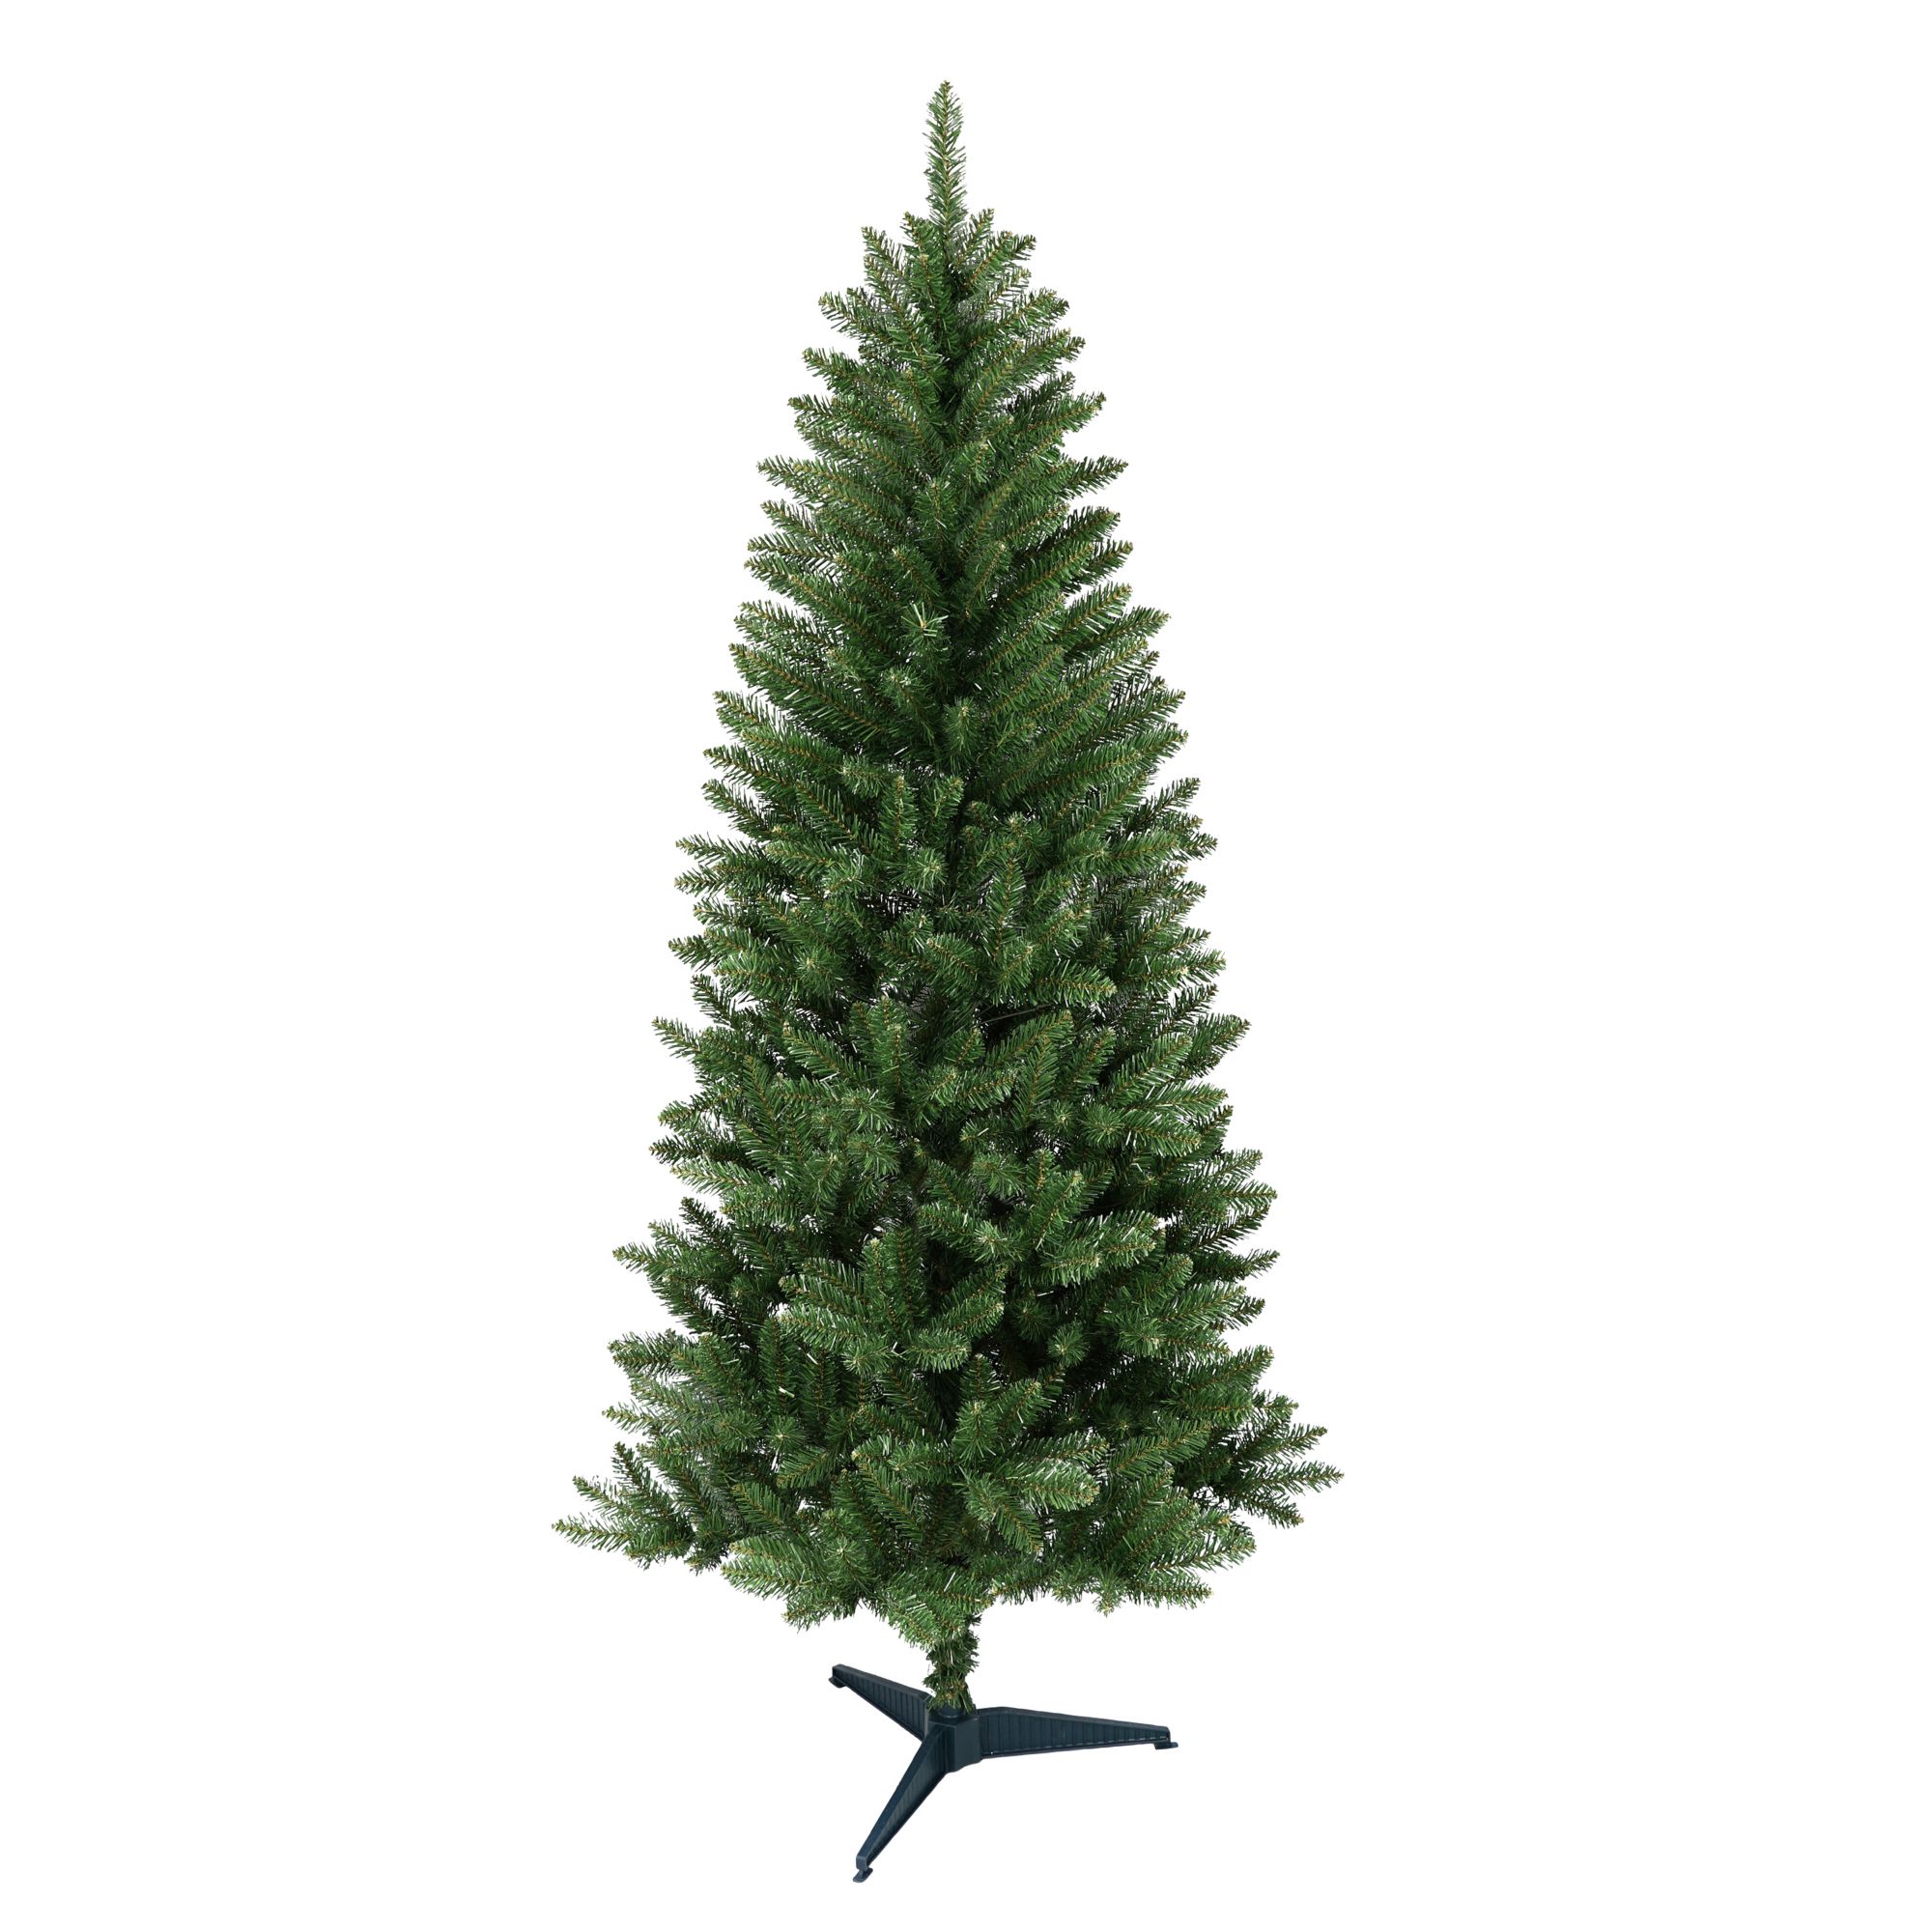 Puleo International 6' Carson Pine Artificial Christmas Tree with Stand